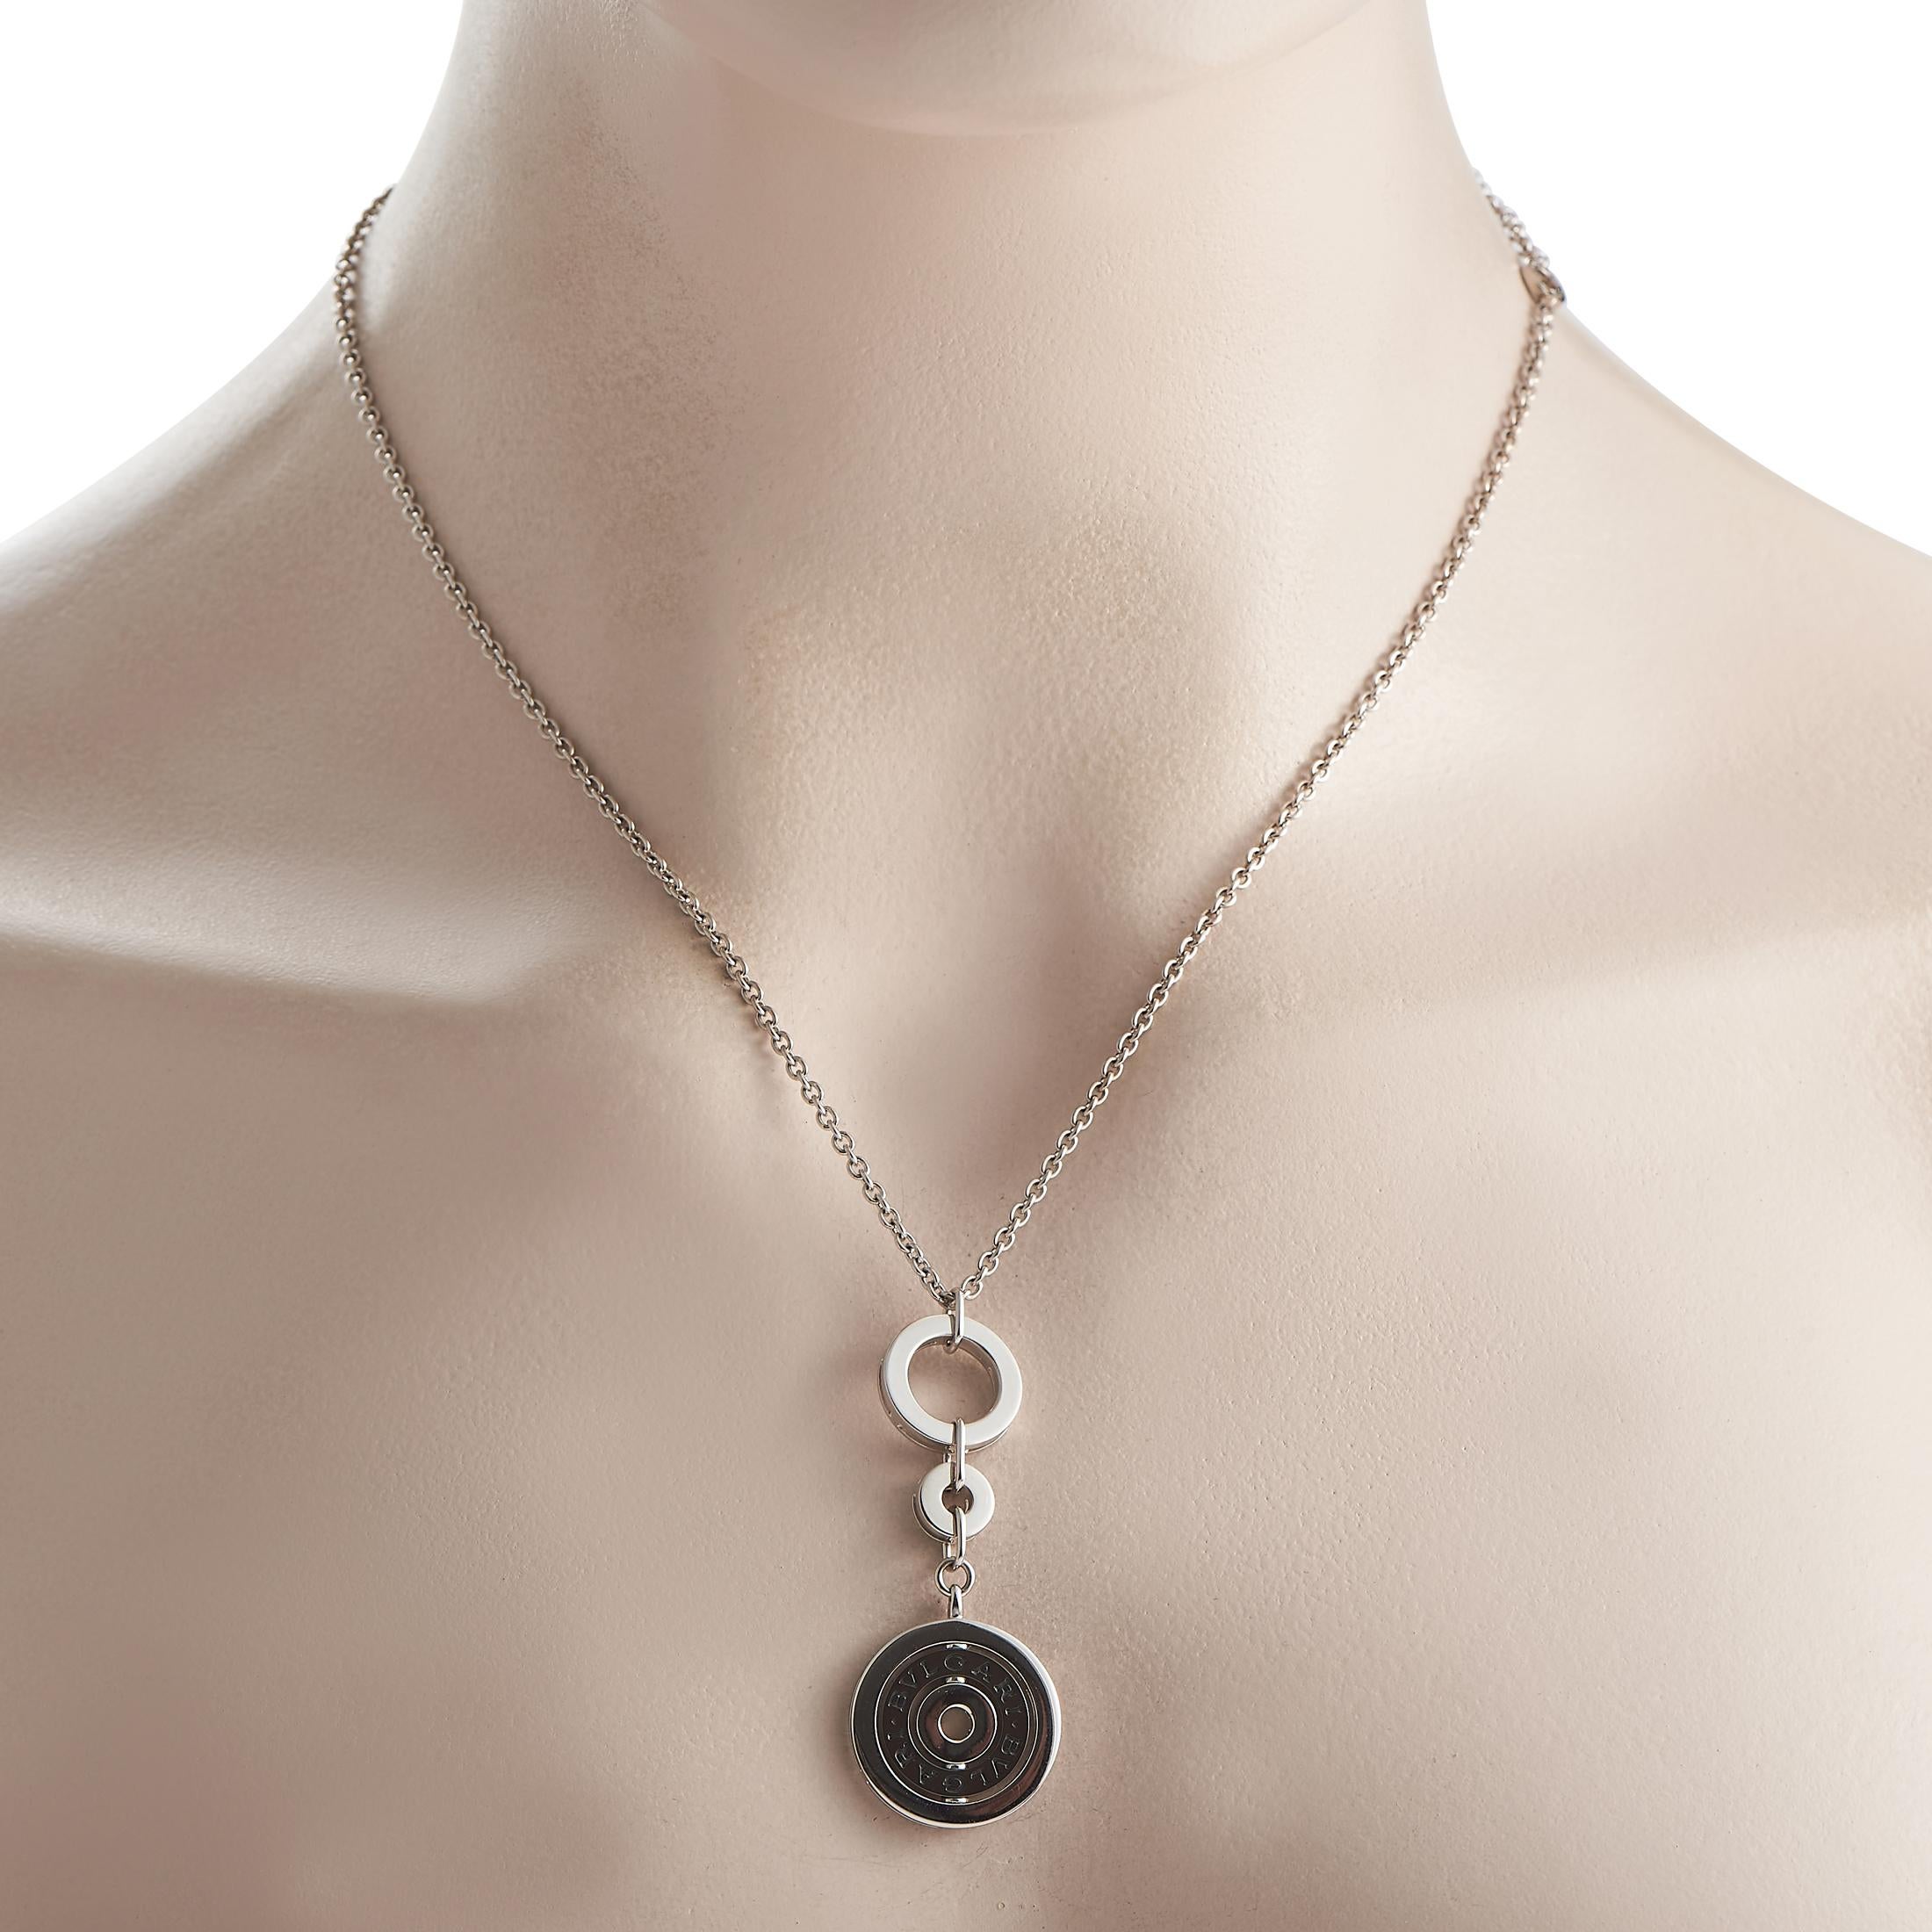 This solid 18K white gold necklace is a signed and hallmarked rare, vintage piece from Bvlgari's Astrale Cerchi collection. Inspired by the night sky, the necklace features three white gold circles inspired by celestial spheres. The hoops vary in